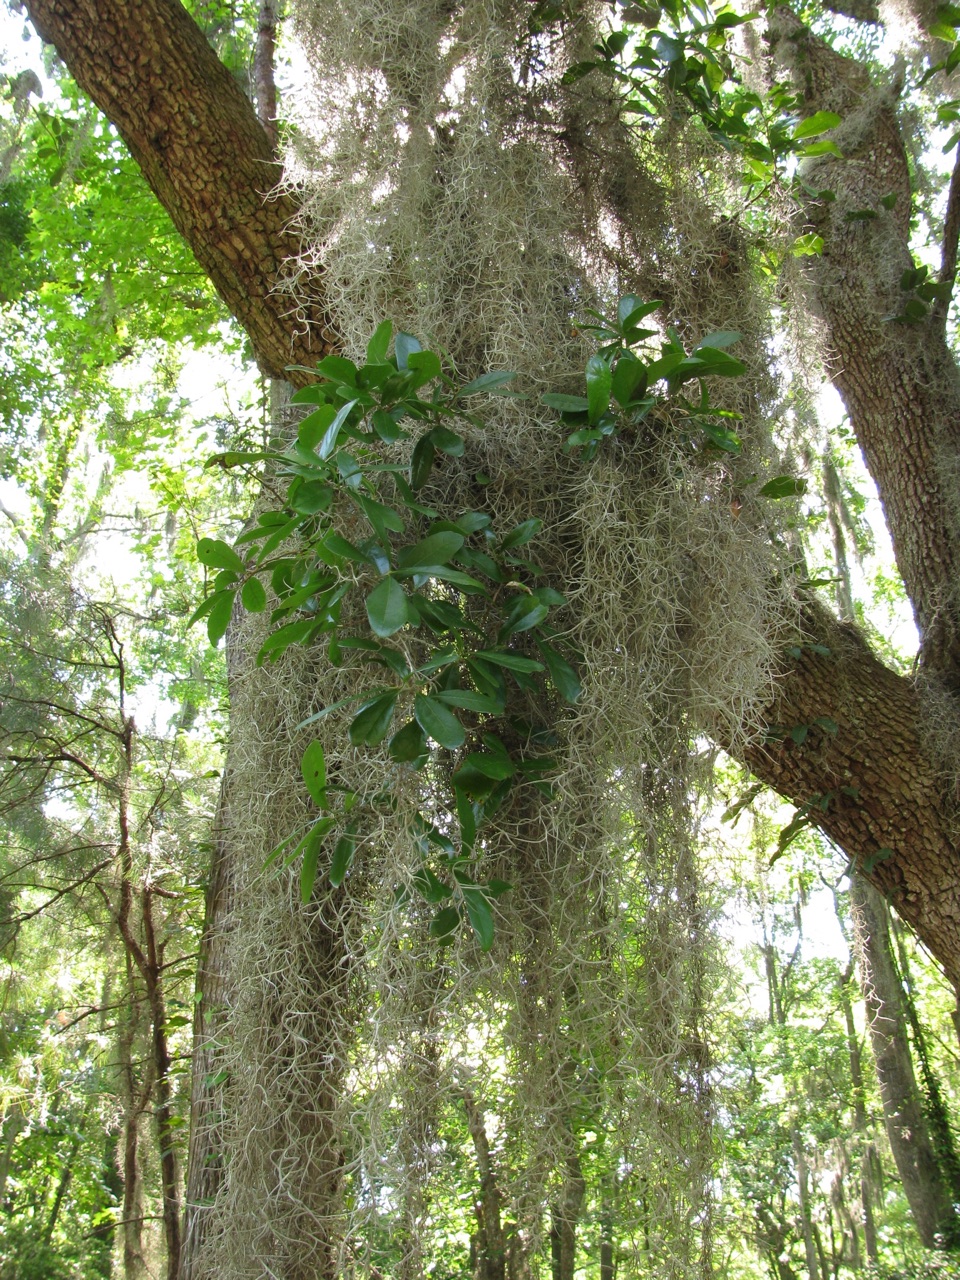 The Scientific Name is Quercus virginiana. You will likely hear them called Live Oak. This picture shows the Festooned with Spanish Moss of Quercus virginiana